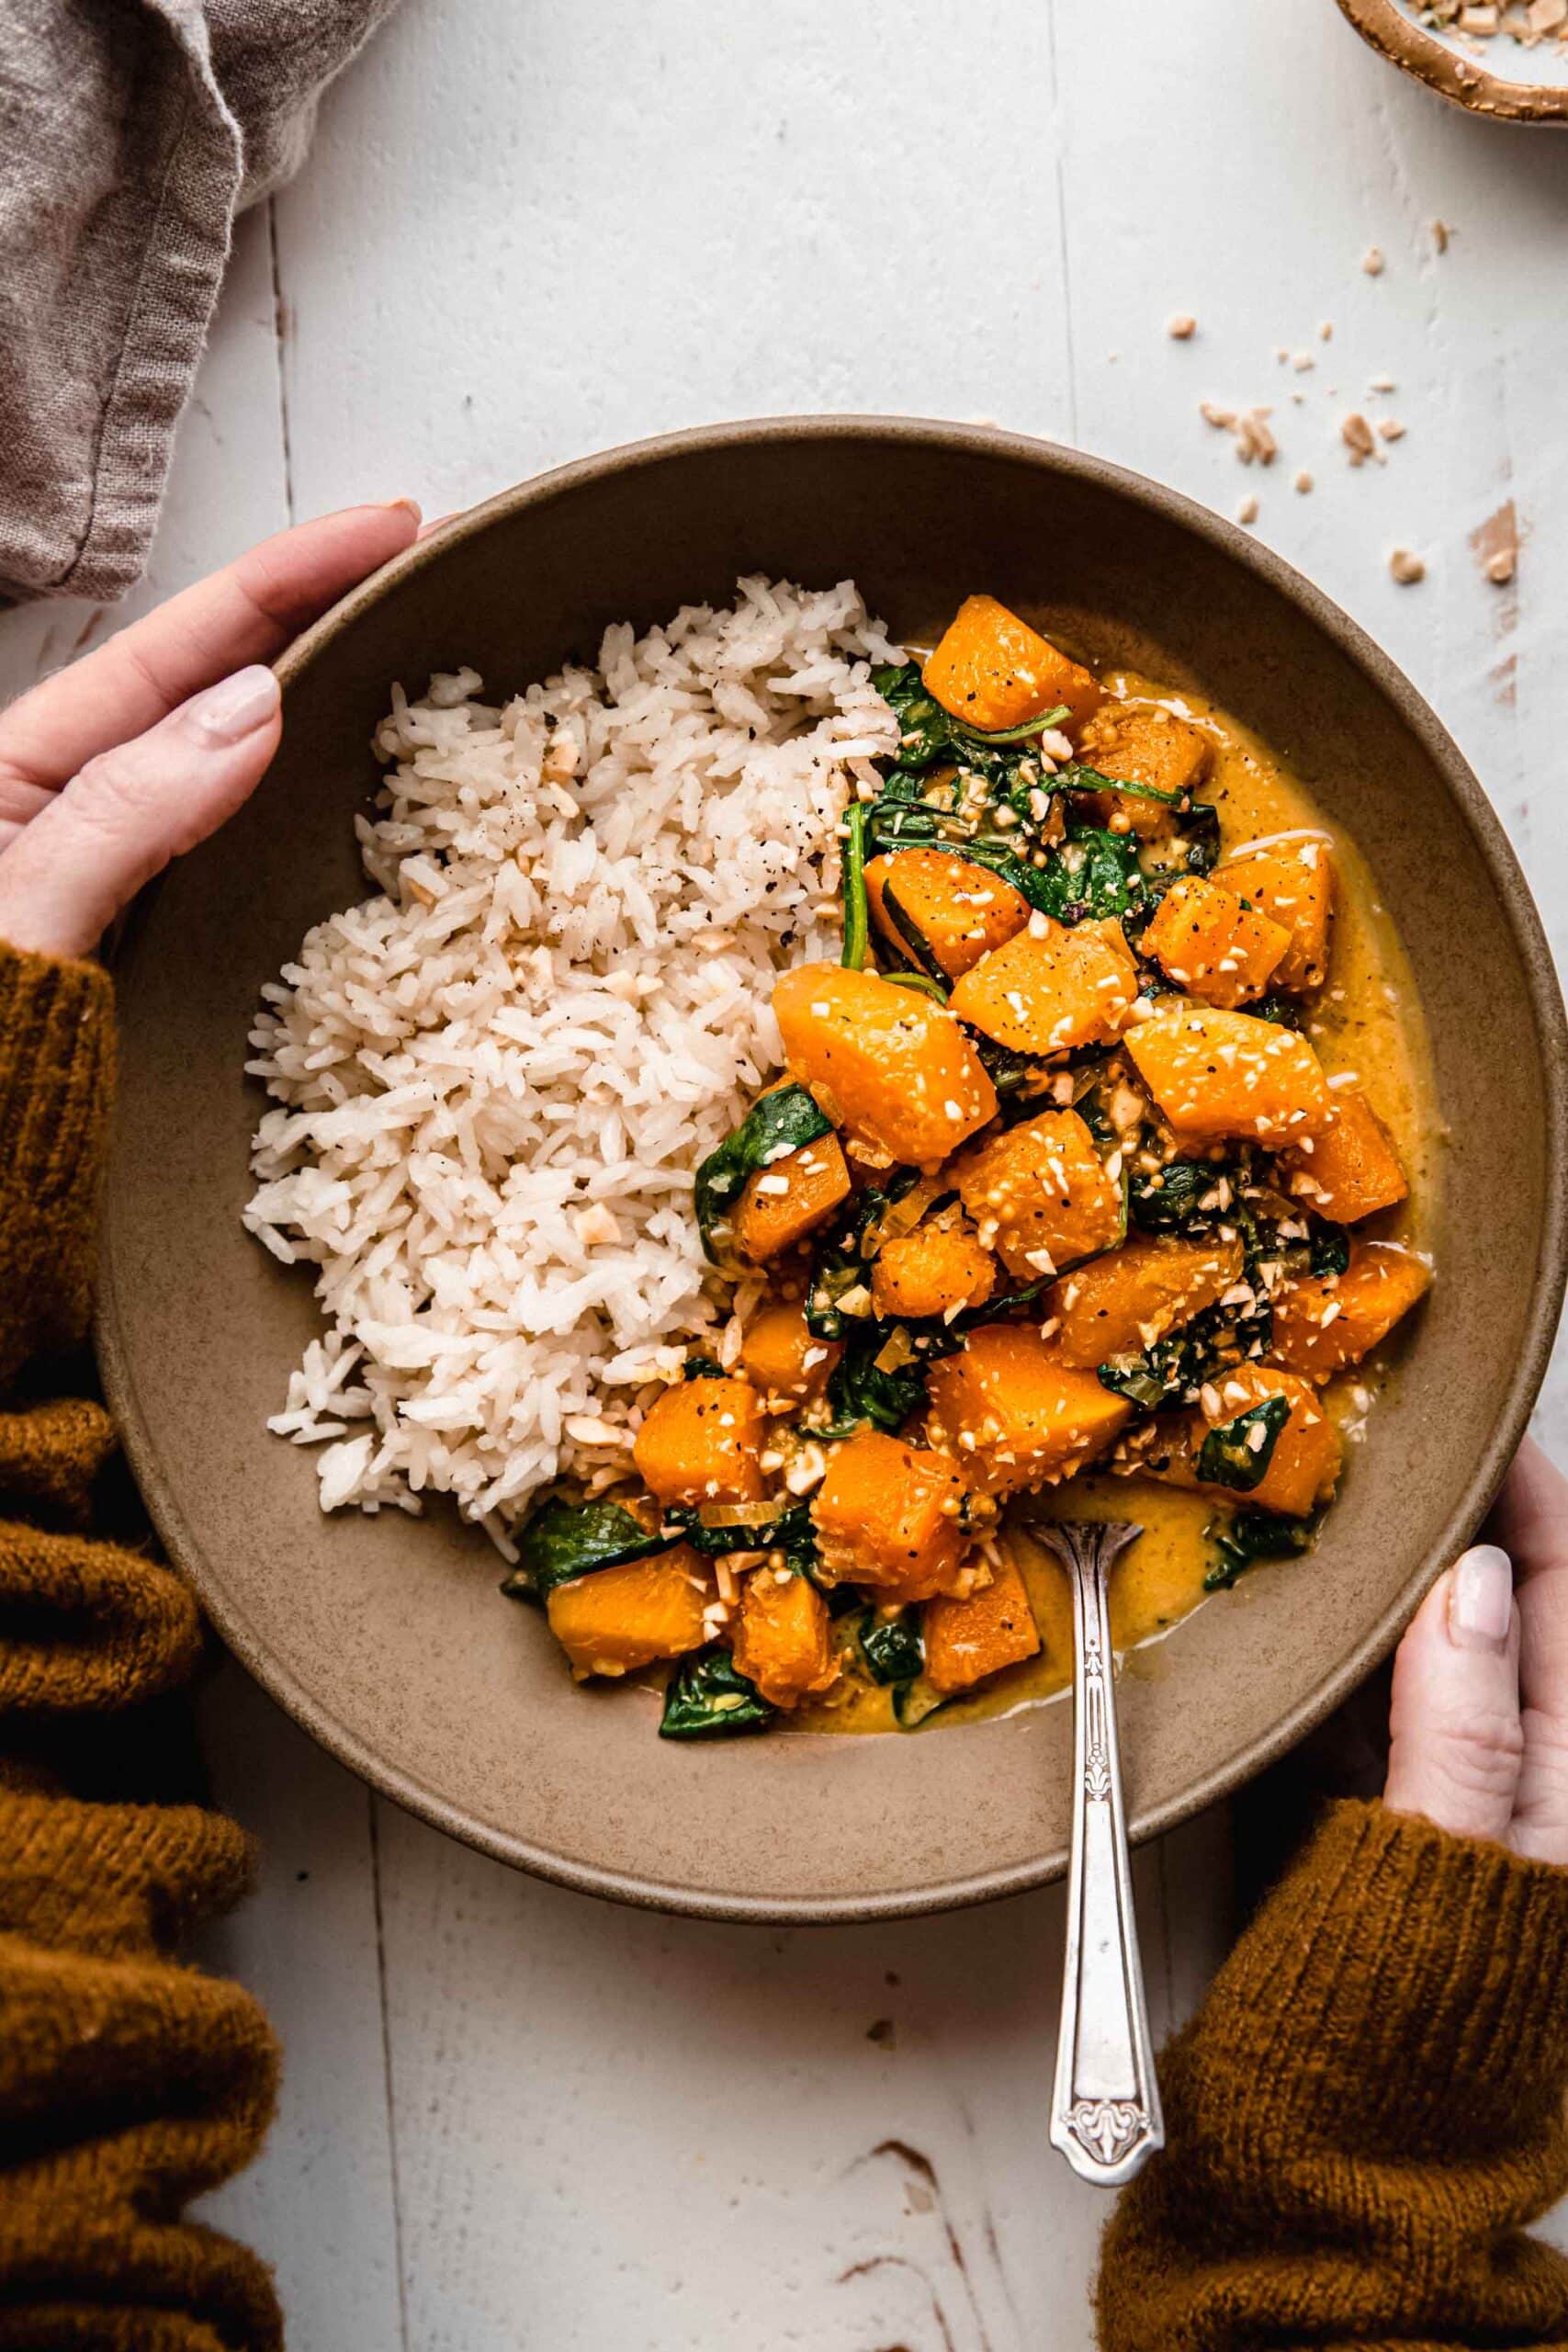 Hands holding bowl of butternut squash curry.